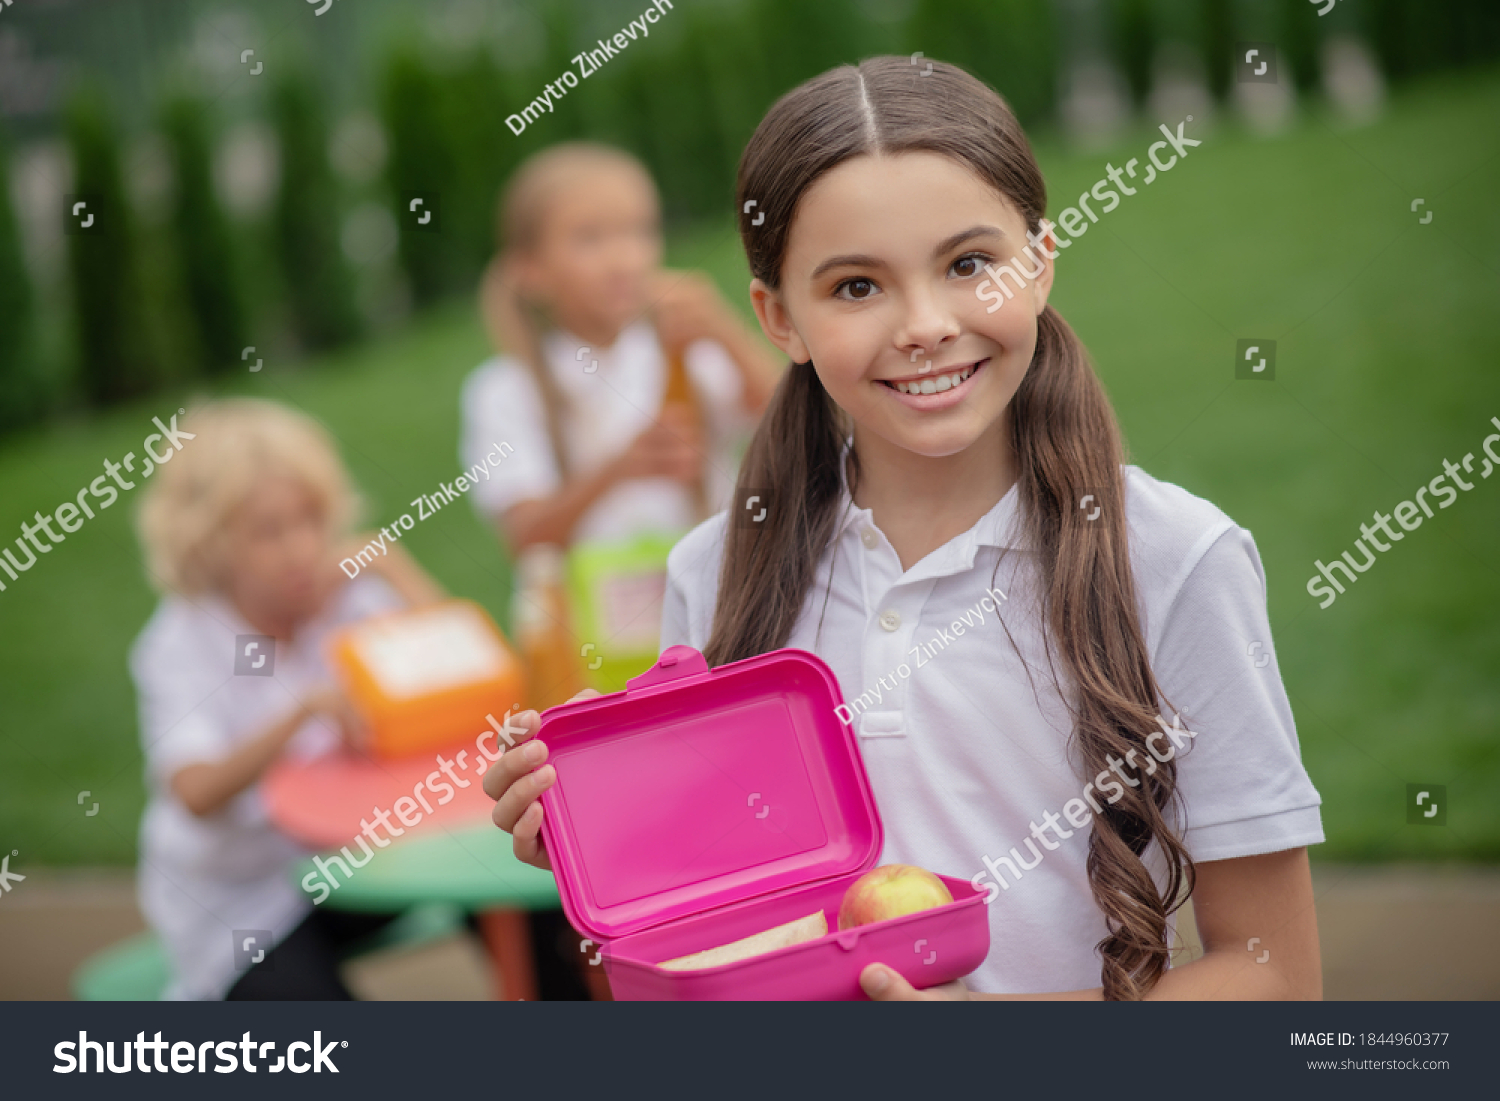 Lunch. A girl with a lunch box smiling nicely #1844960377